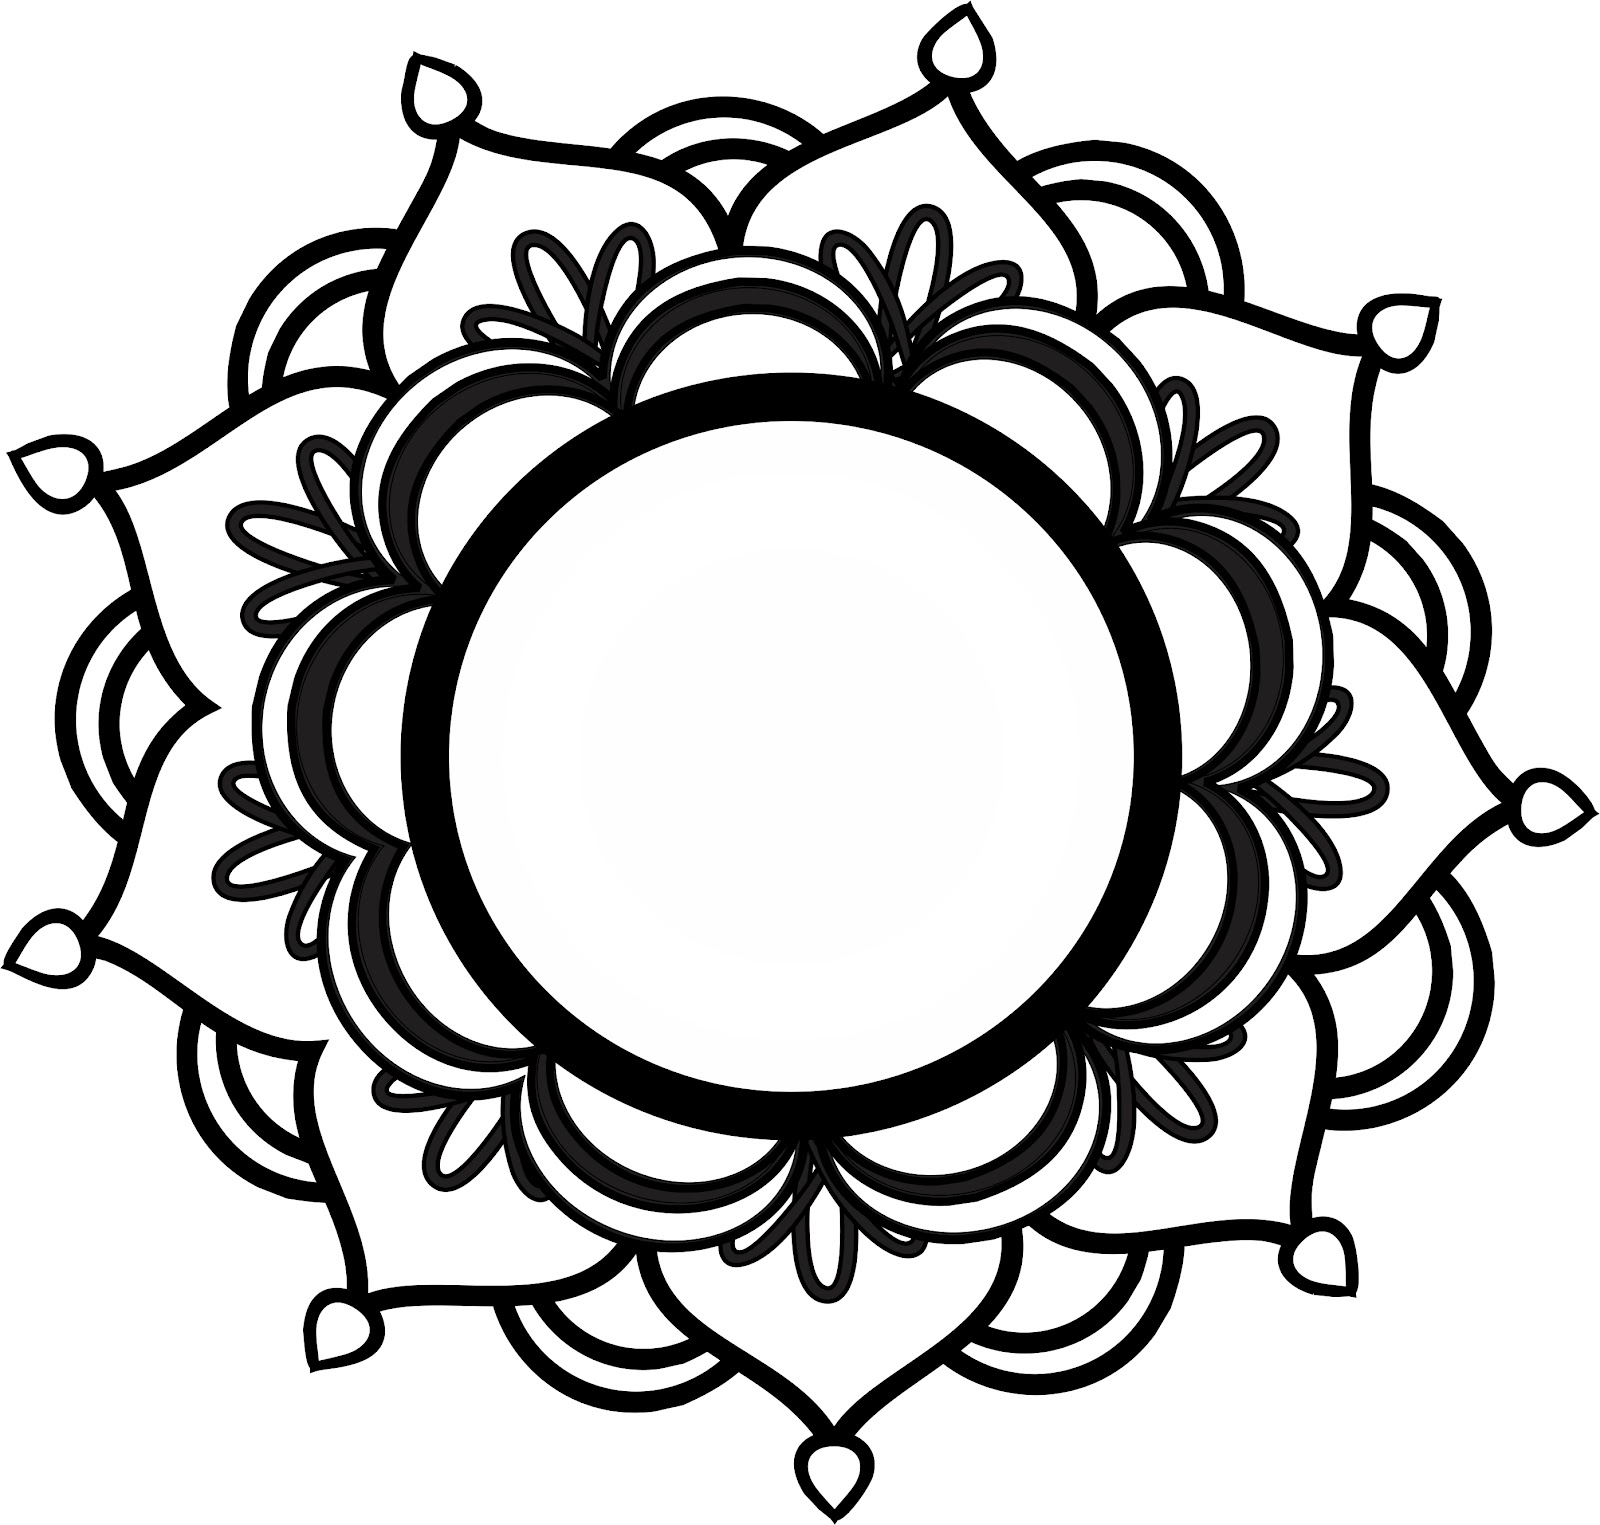 Lotus Mandala Outline Pictures | Online Images Collection